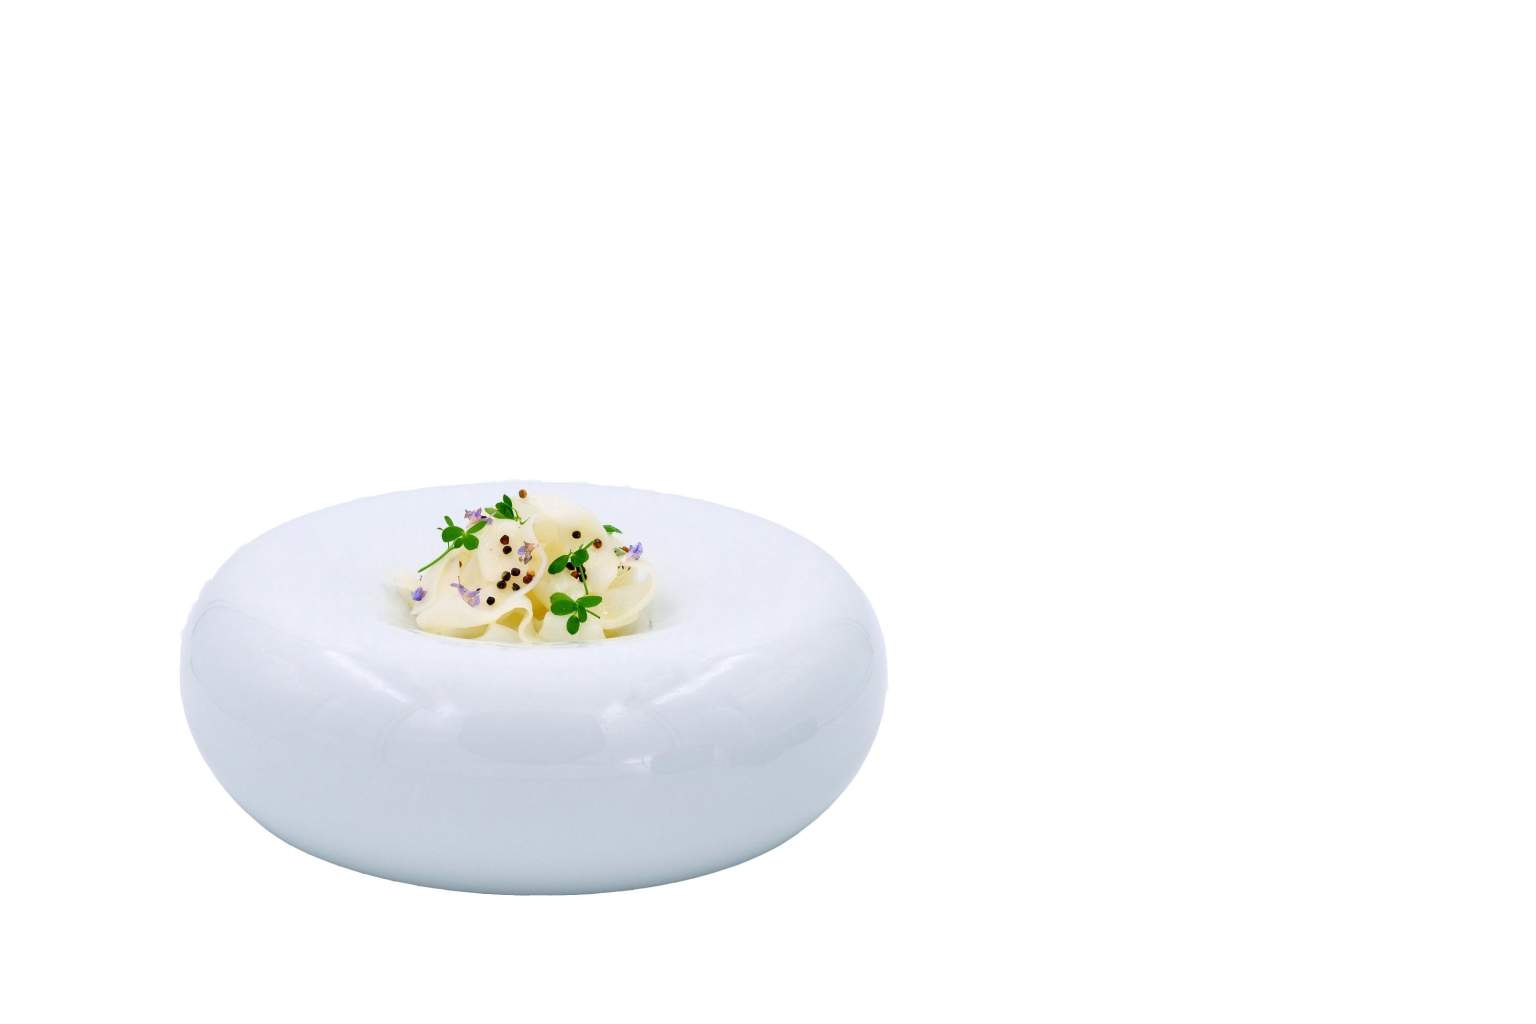 Pascal Borrell's dishes